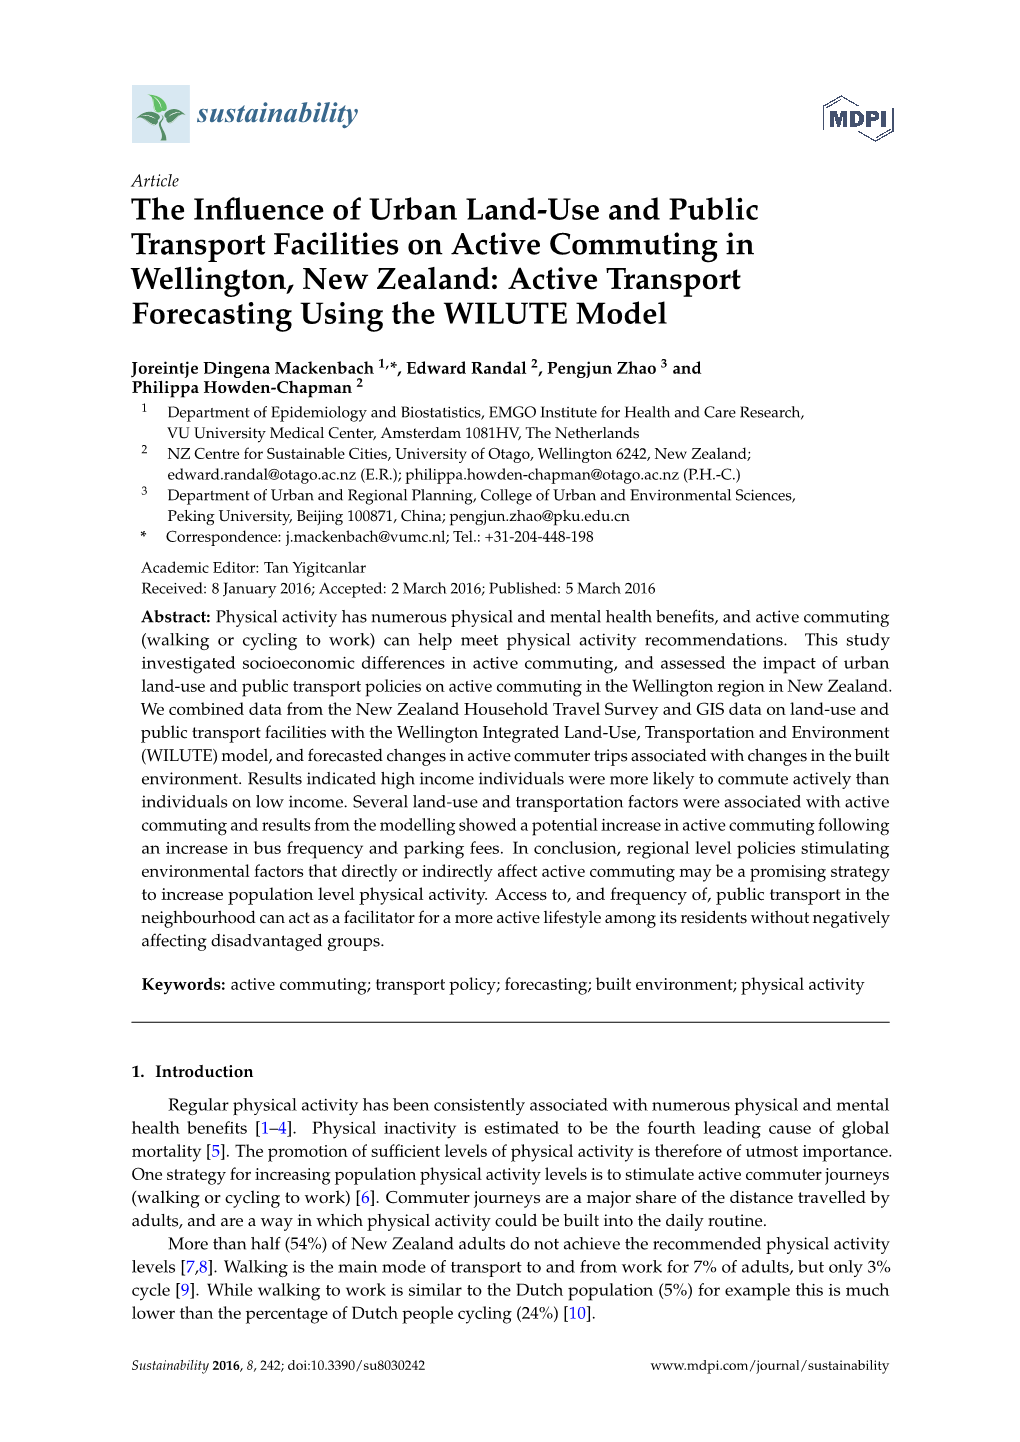 The Influence of Urban Land-Use and Public Transport Facilities on Active Commuting in Wellington, New Zealand: Active Transport